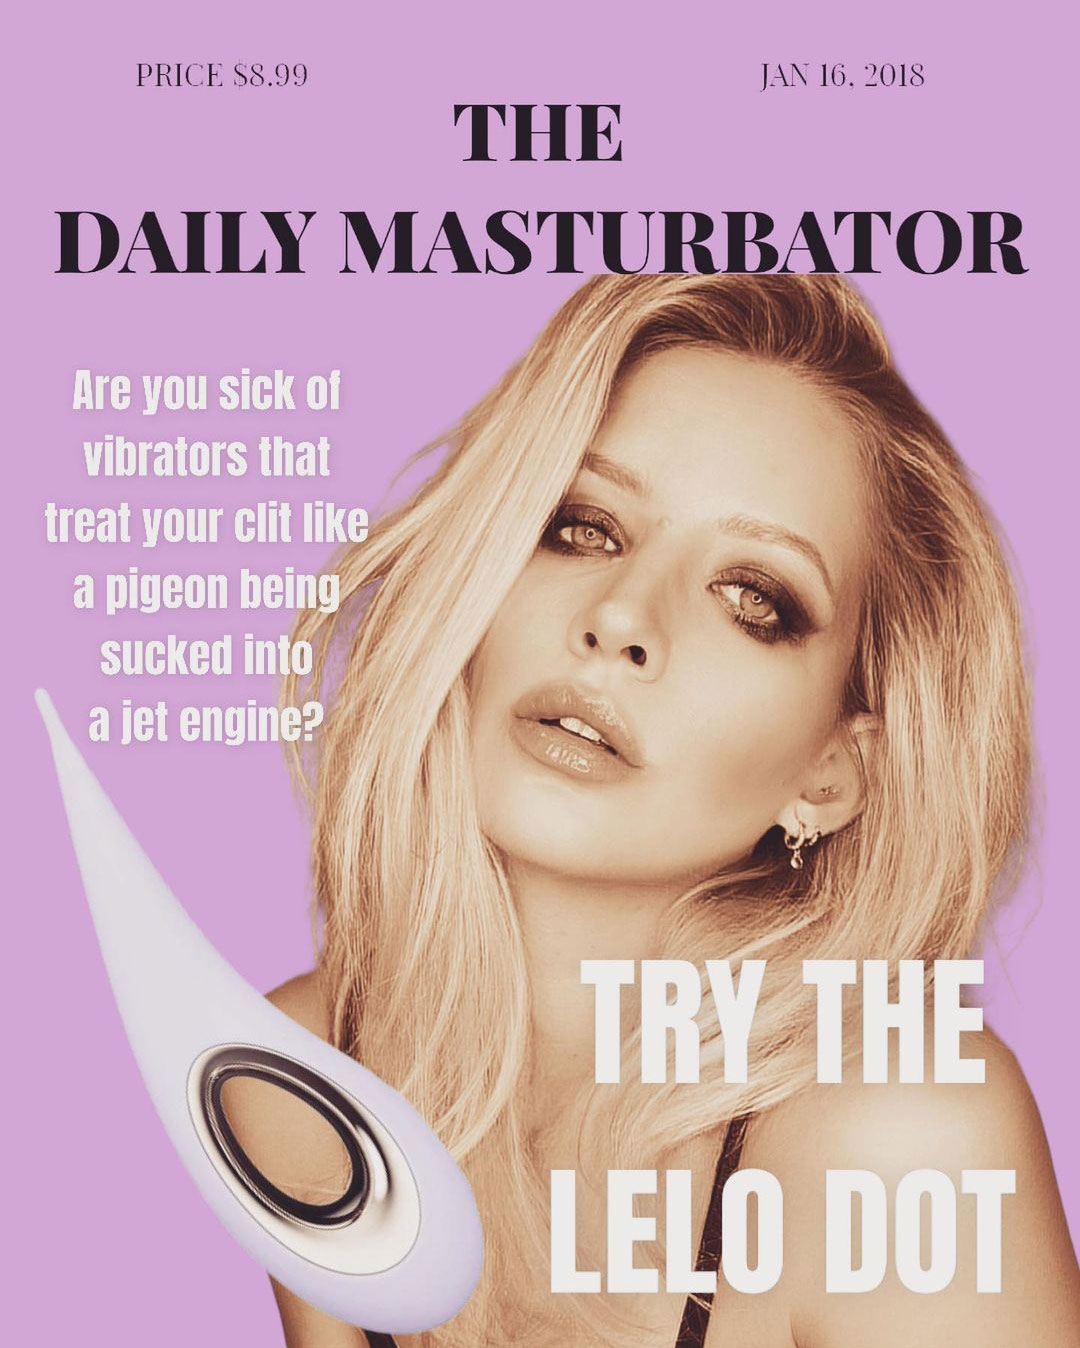 Magazine Cover Mock Up for 'The Daily Masturbator' featuring Carly Sophia and The Lelo Do - Are you sick of vibrators that treat your clit like a pigeon being sucked into a jet engine?